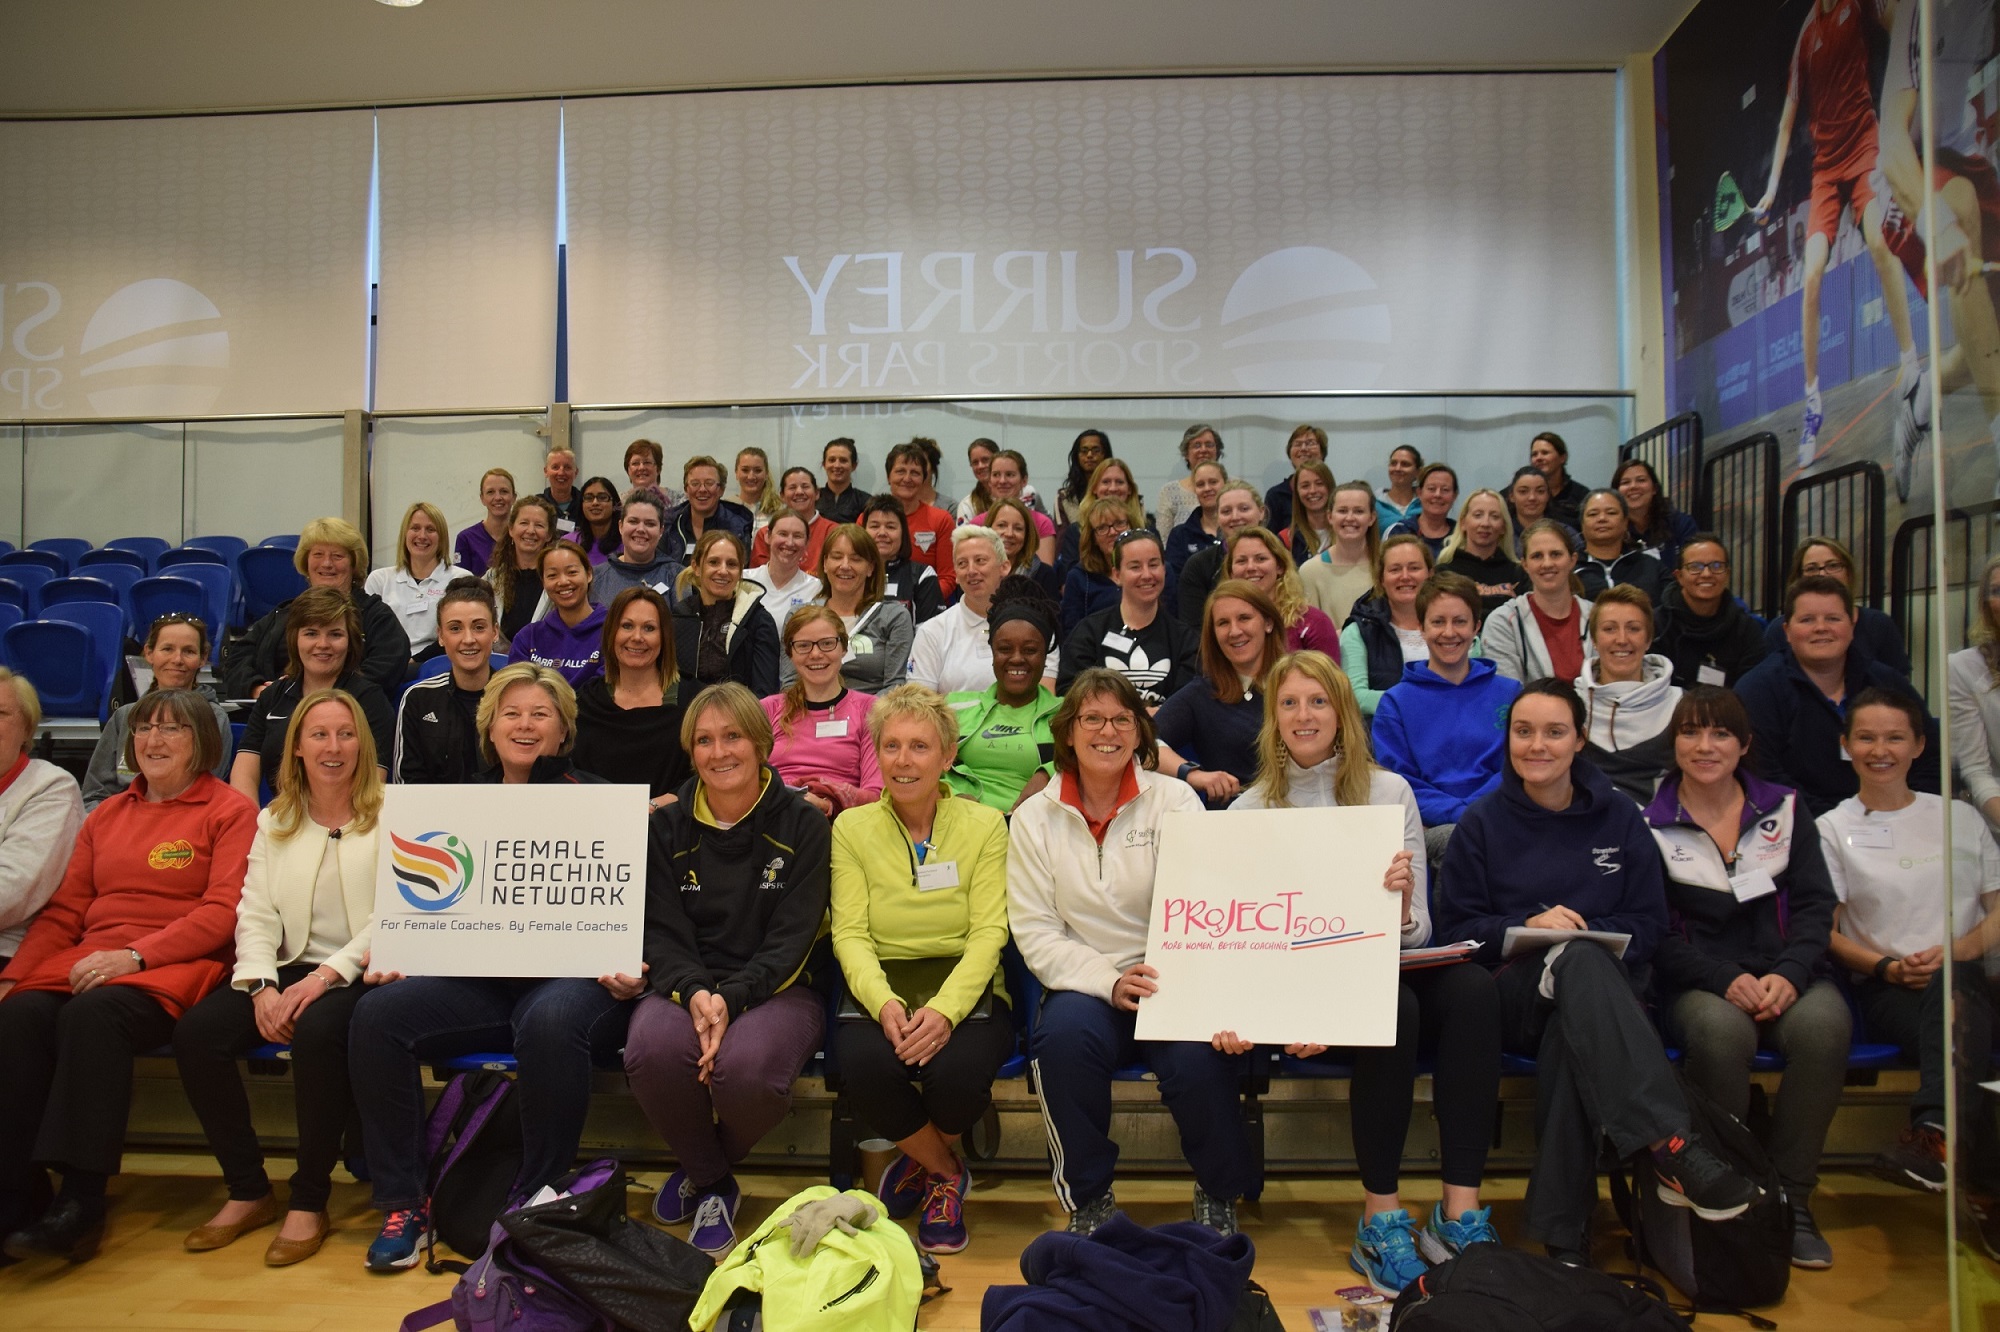 Group photograph of female coaches at the conference